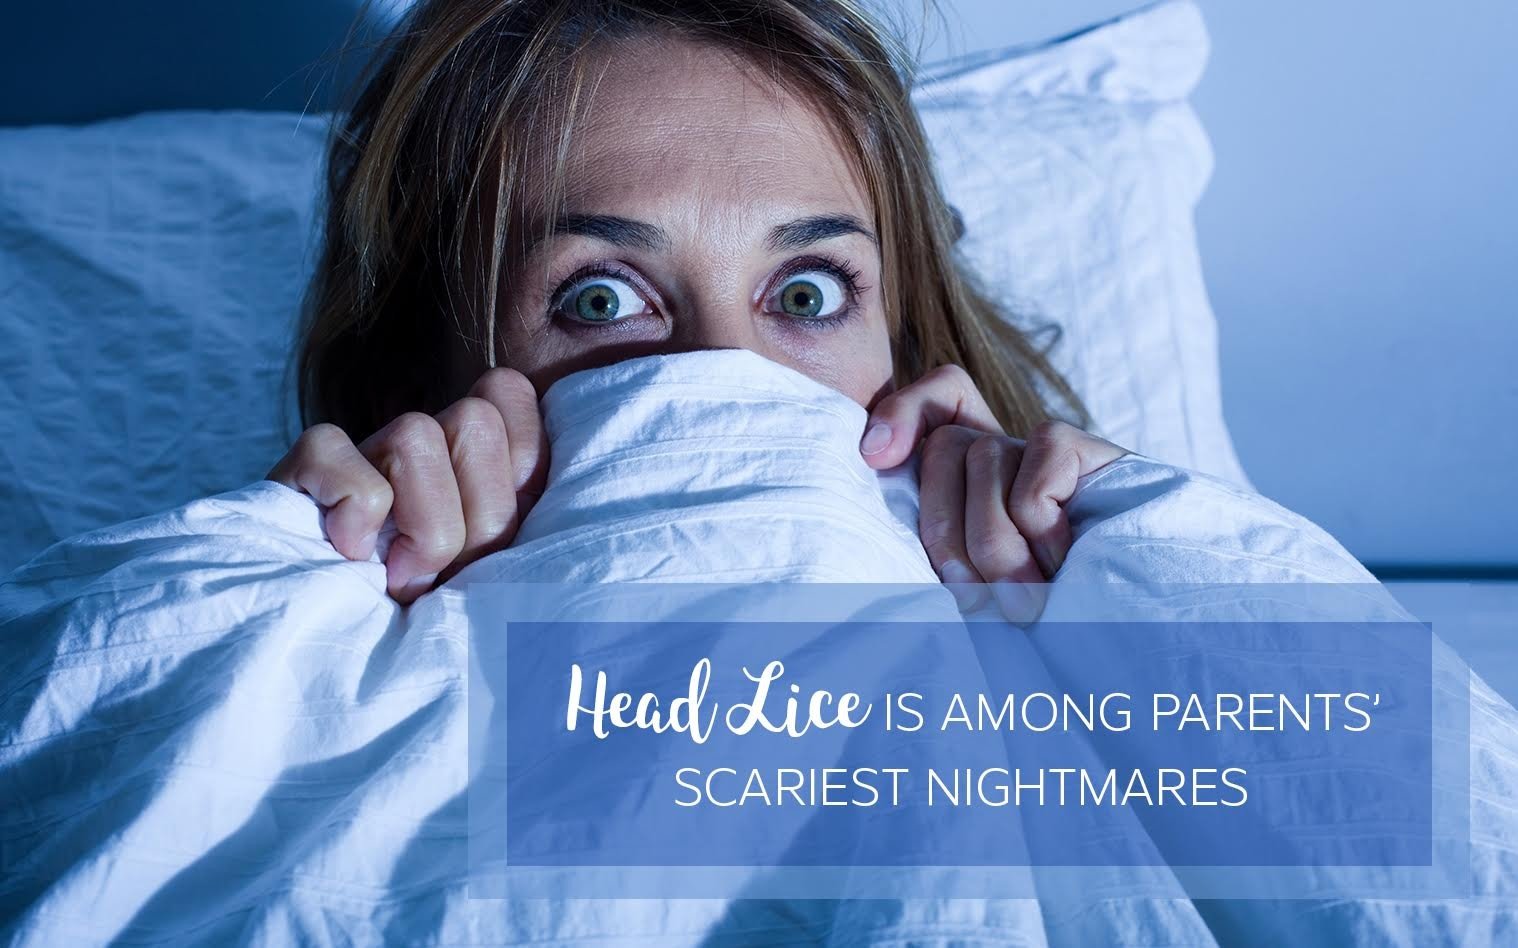 Head lice removal scares a mother hiding in bed because head lice is among parents’ scariest nightmares visit Lice Clinics of America - Portland for more information